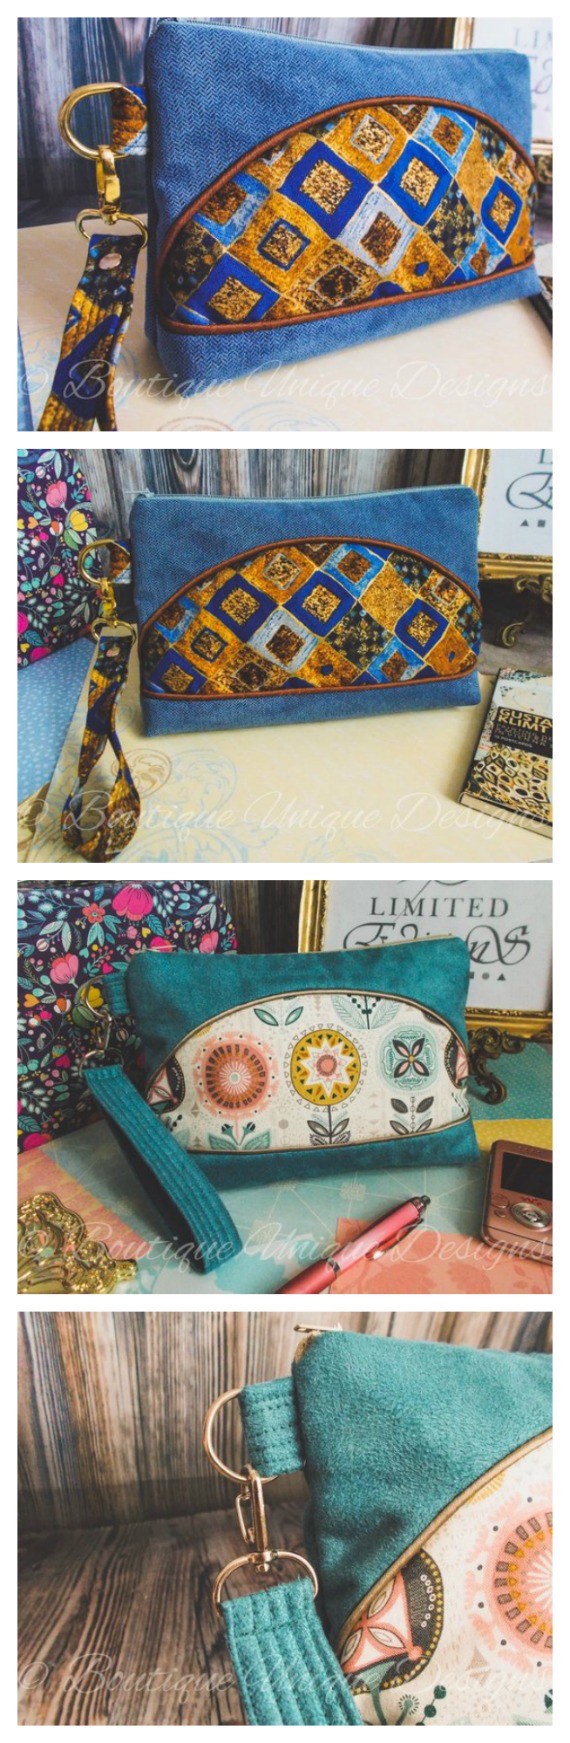 Lucy and Amy 2-pack wristlet bag sewing patterns